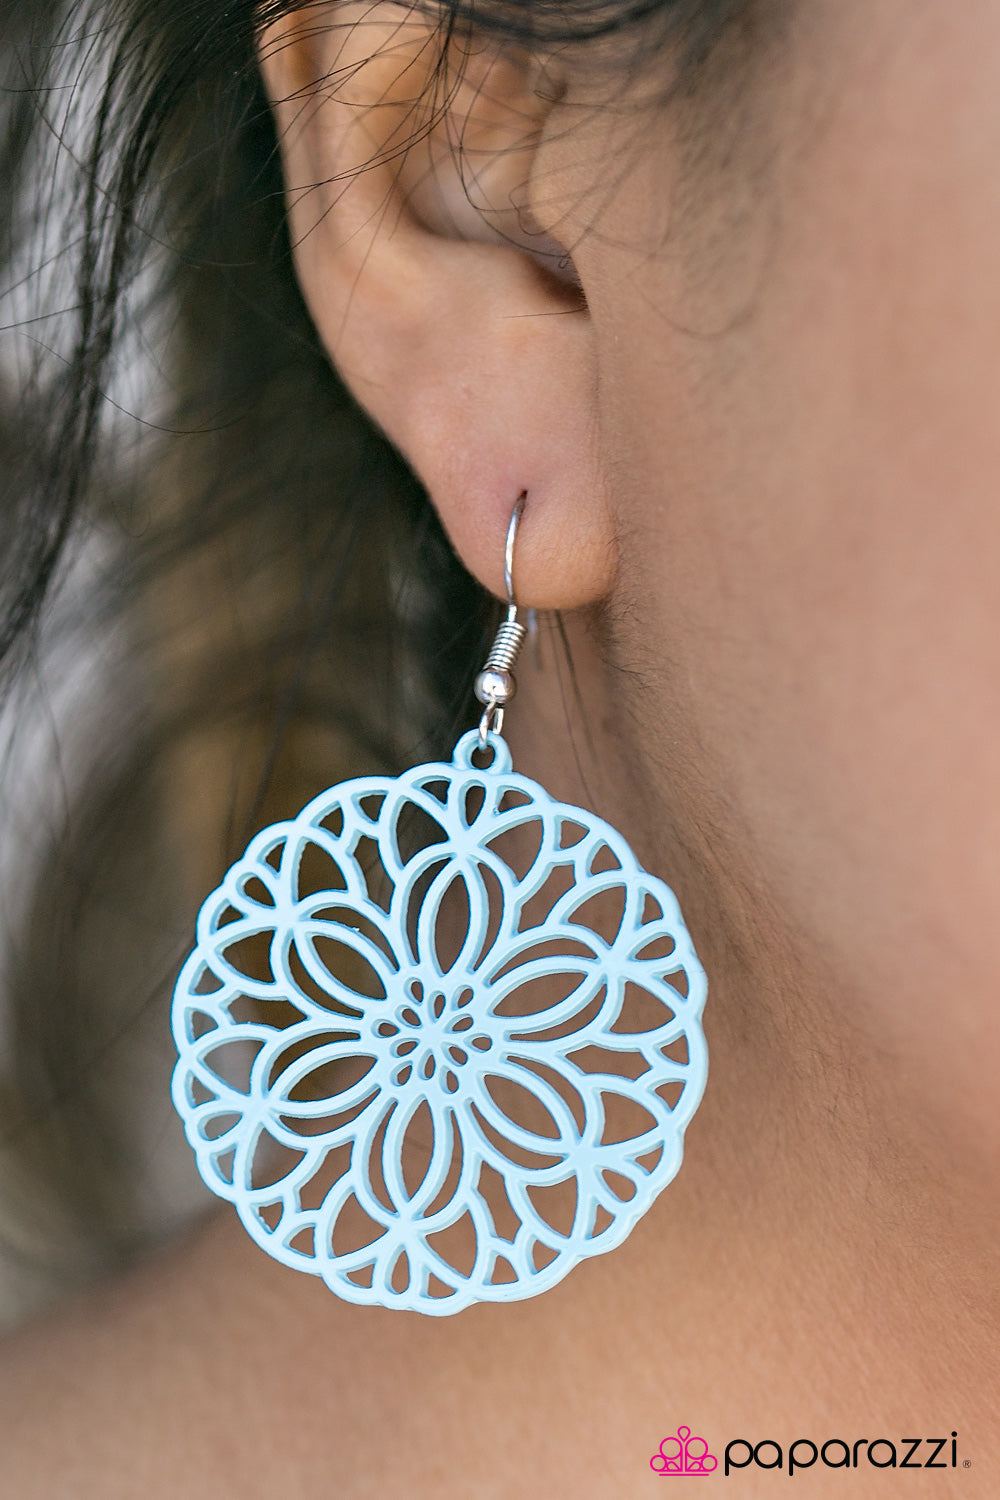 Having A Merry Time - Blue - Paparazzi earrings